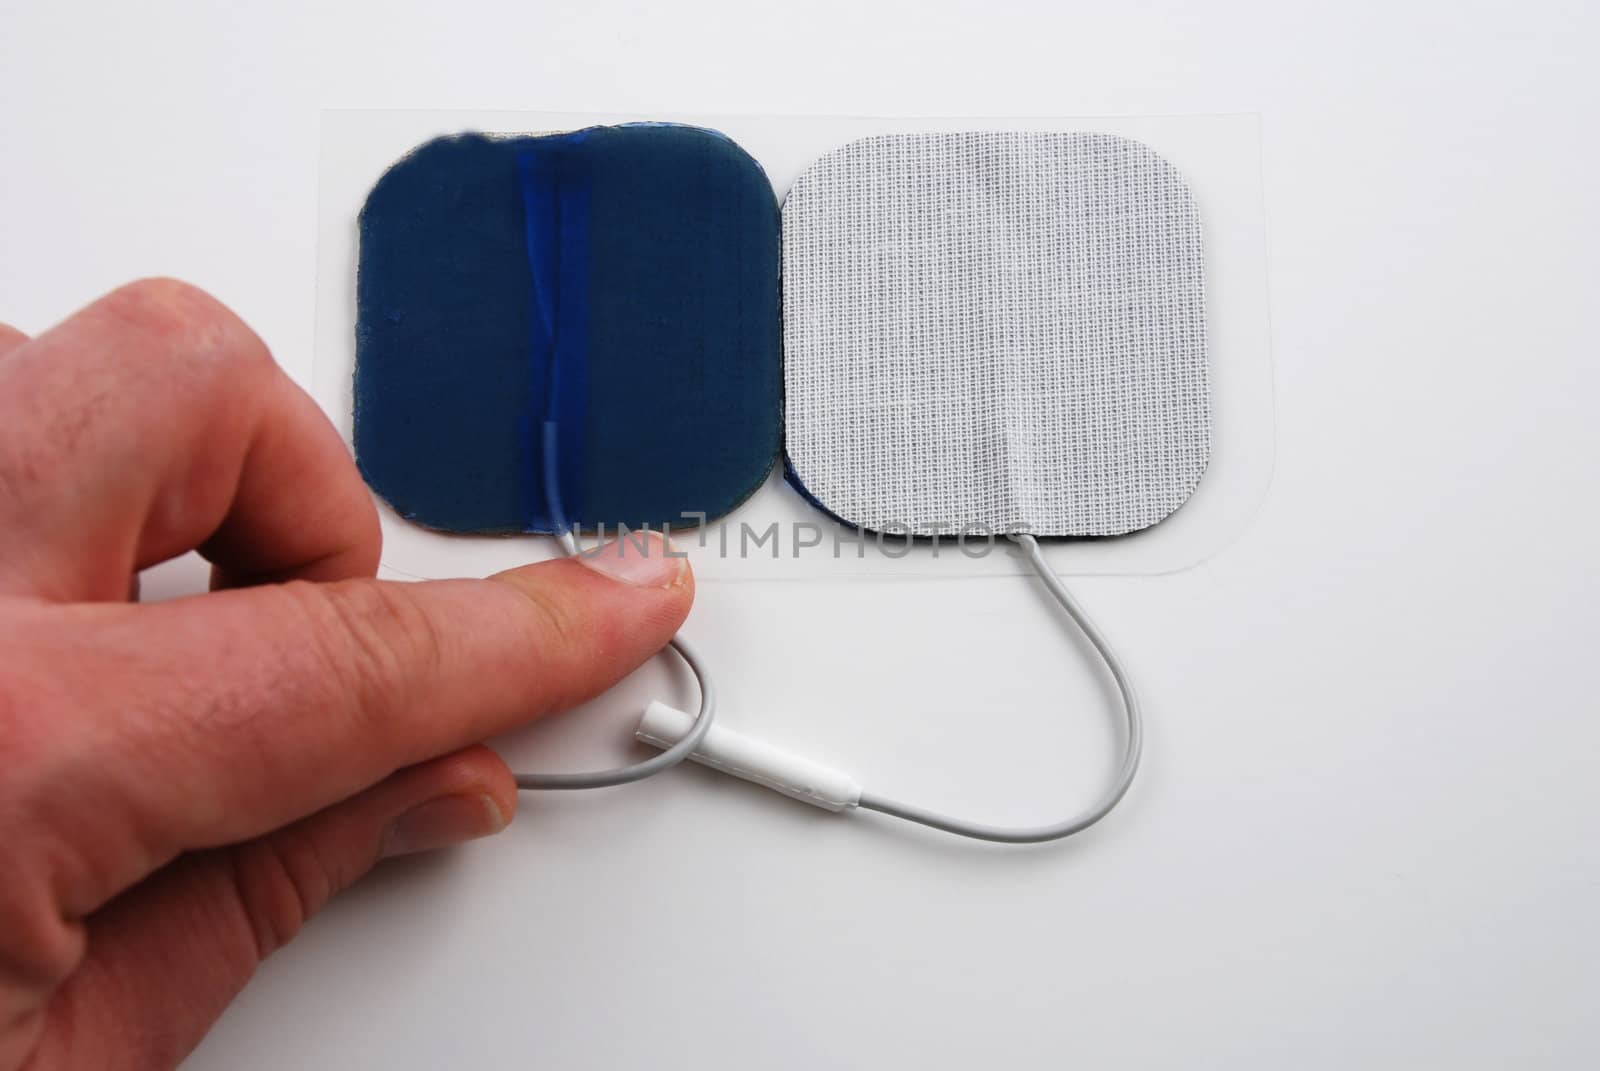 Stock pictures of electrodes used in a variety of medical equipment